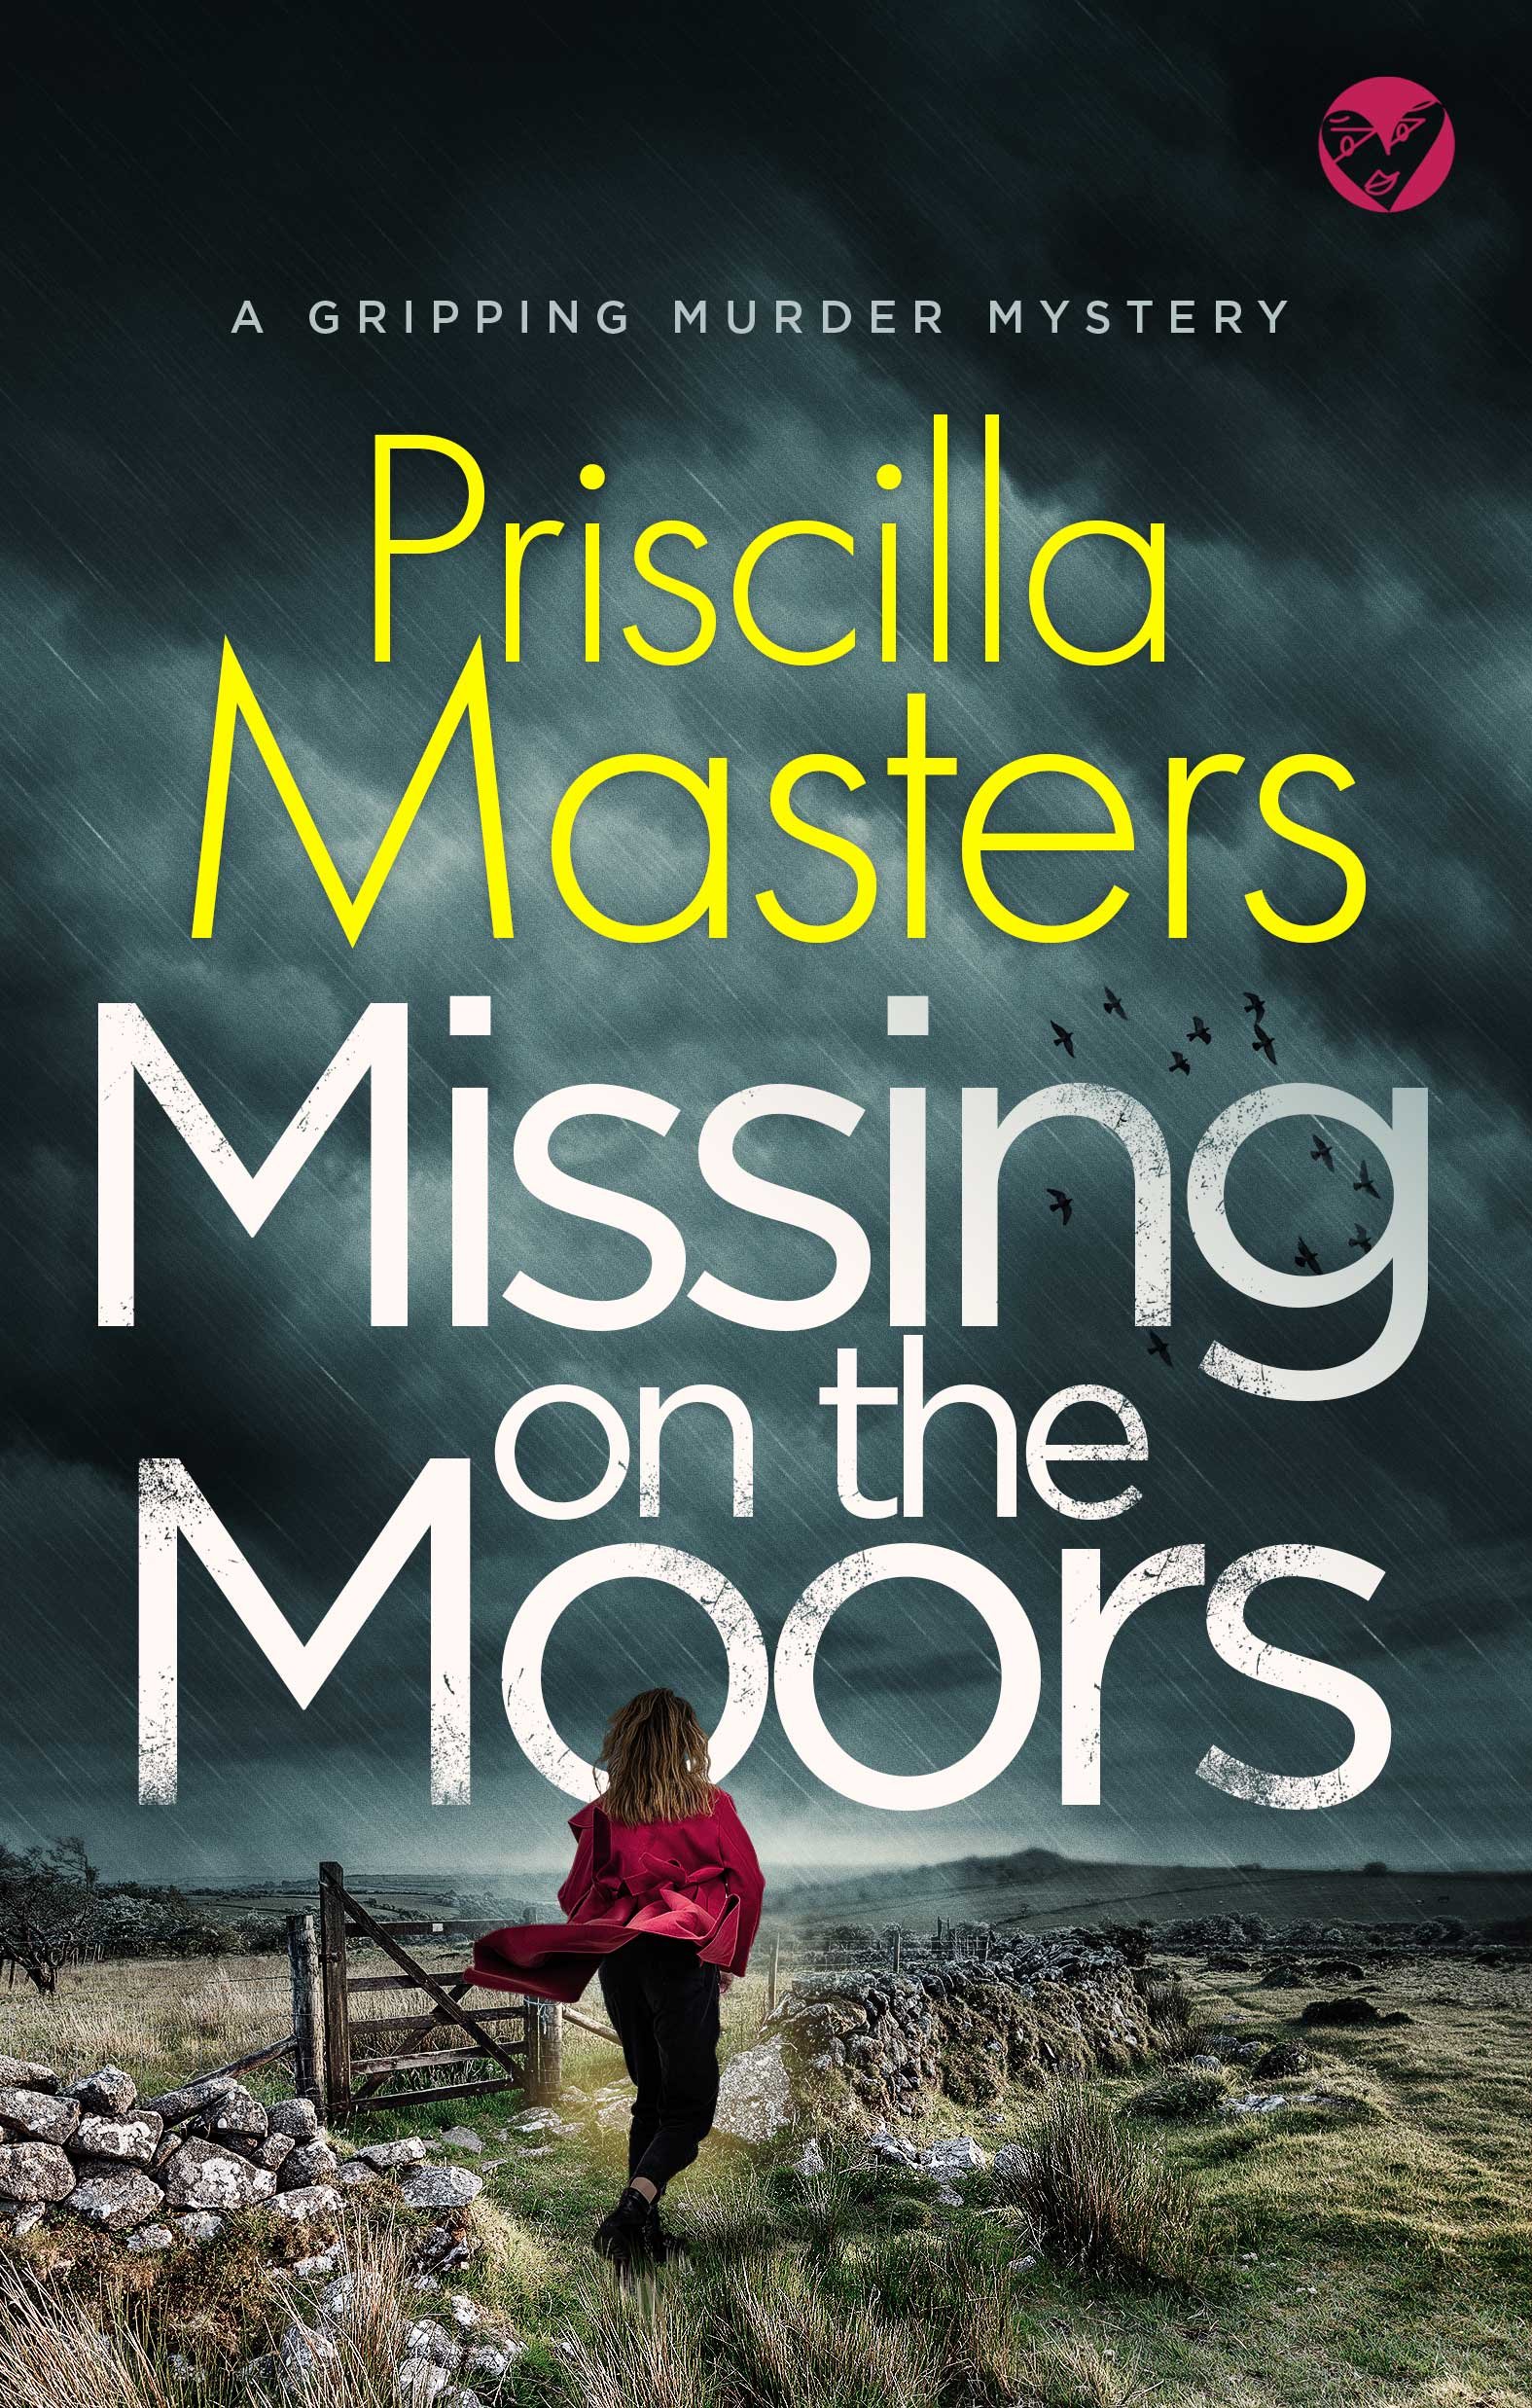 MISSING ON THE MOORS Cover publish 630KB.jpg